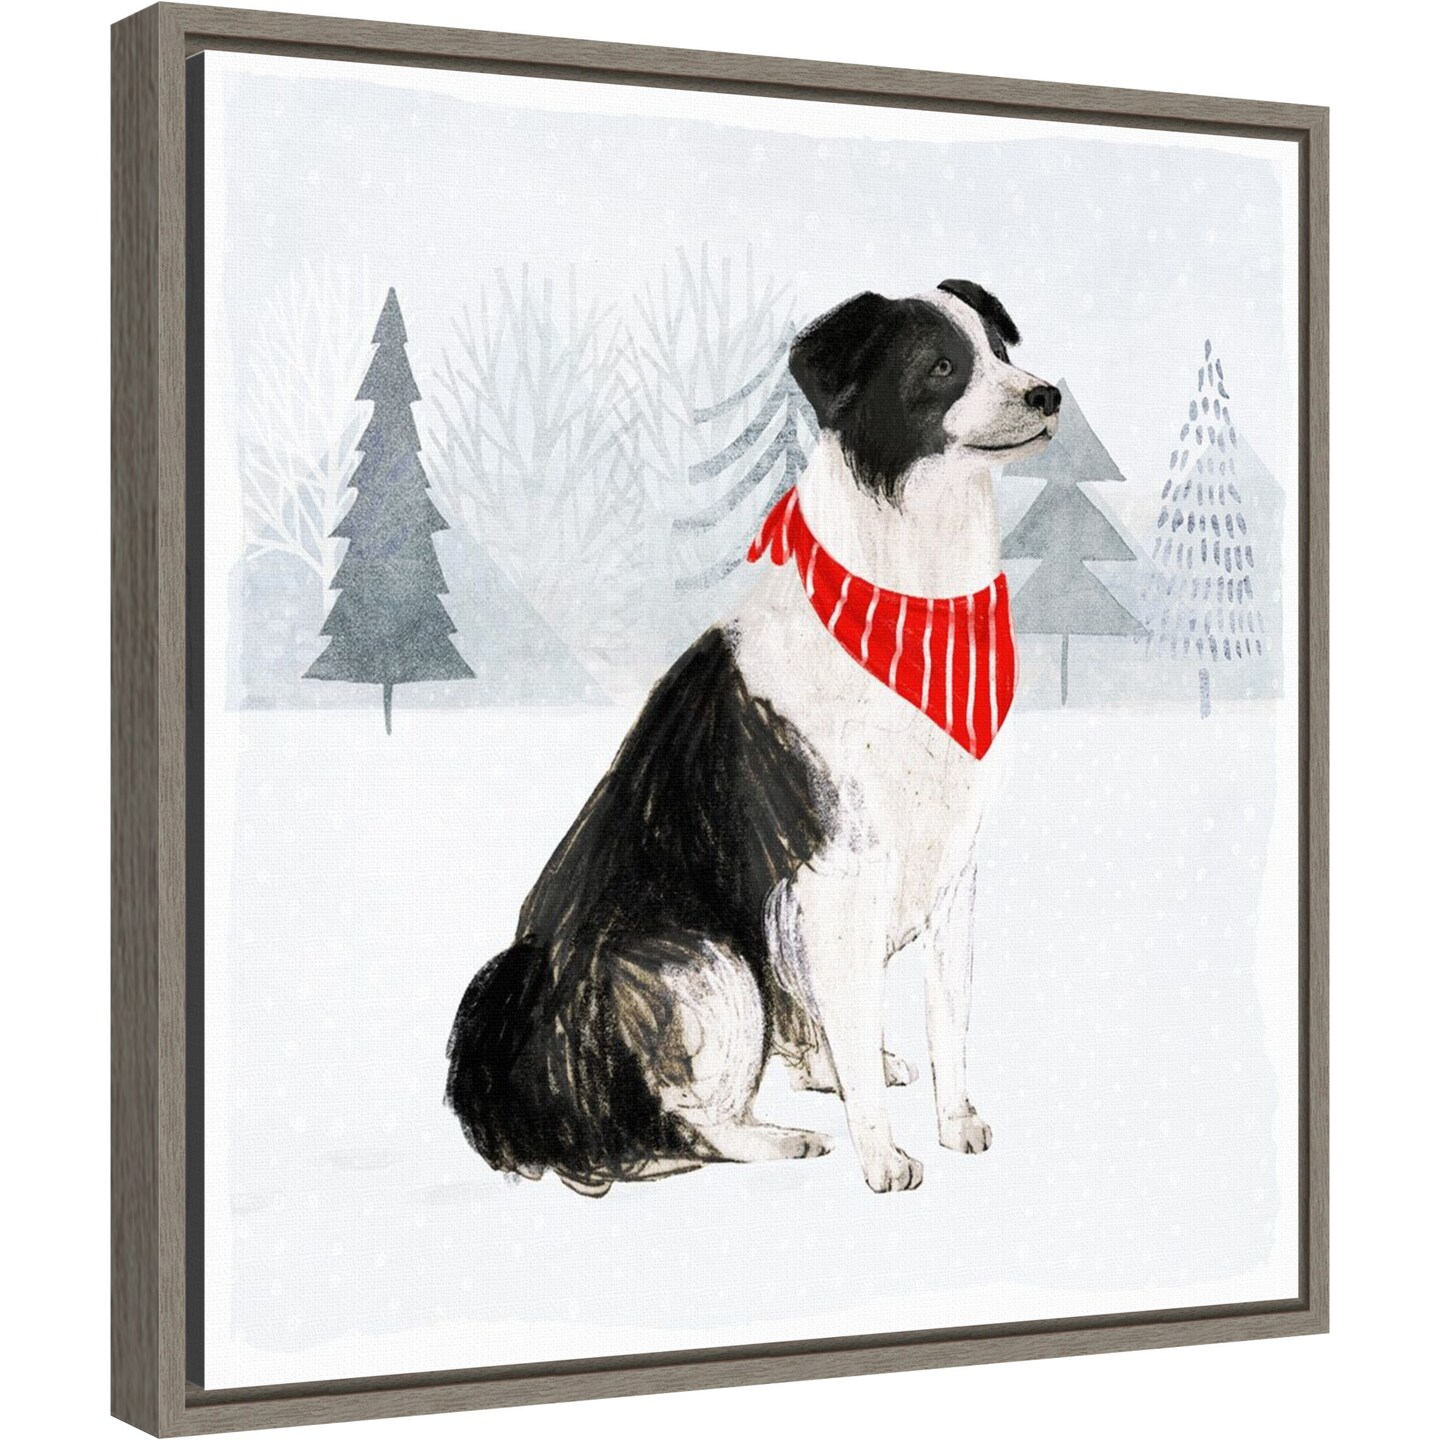 Christmas Cats and Dogs II by Victoria Borges 16-in. W x 16-in. H. Canvas Wall Art Print Framed in Grey